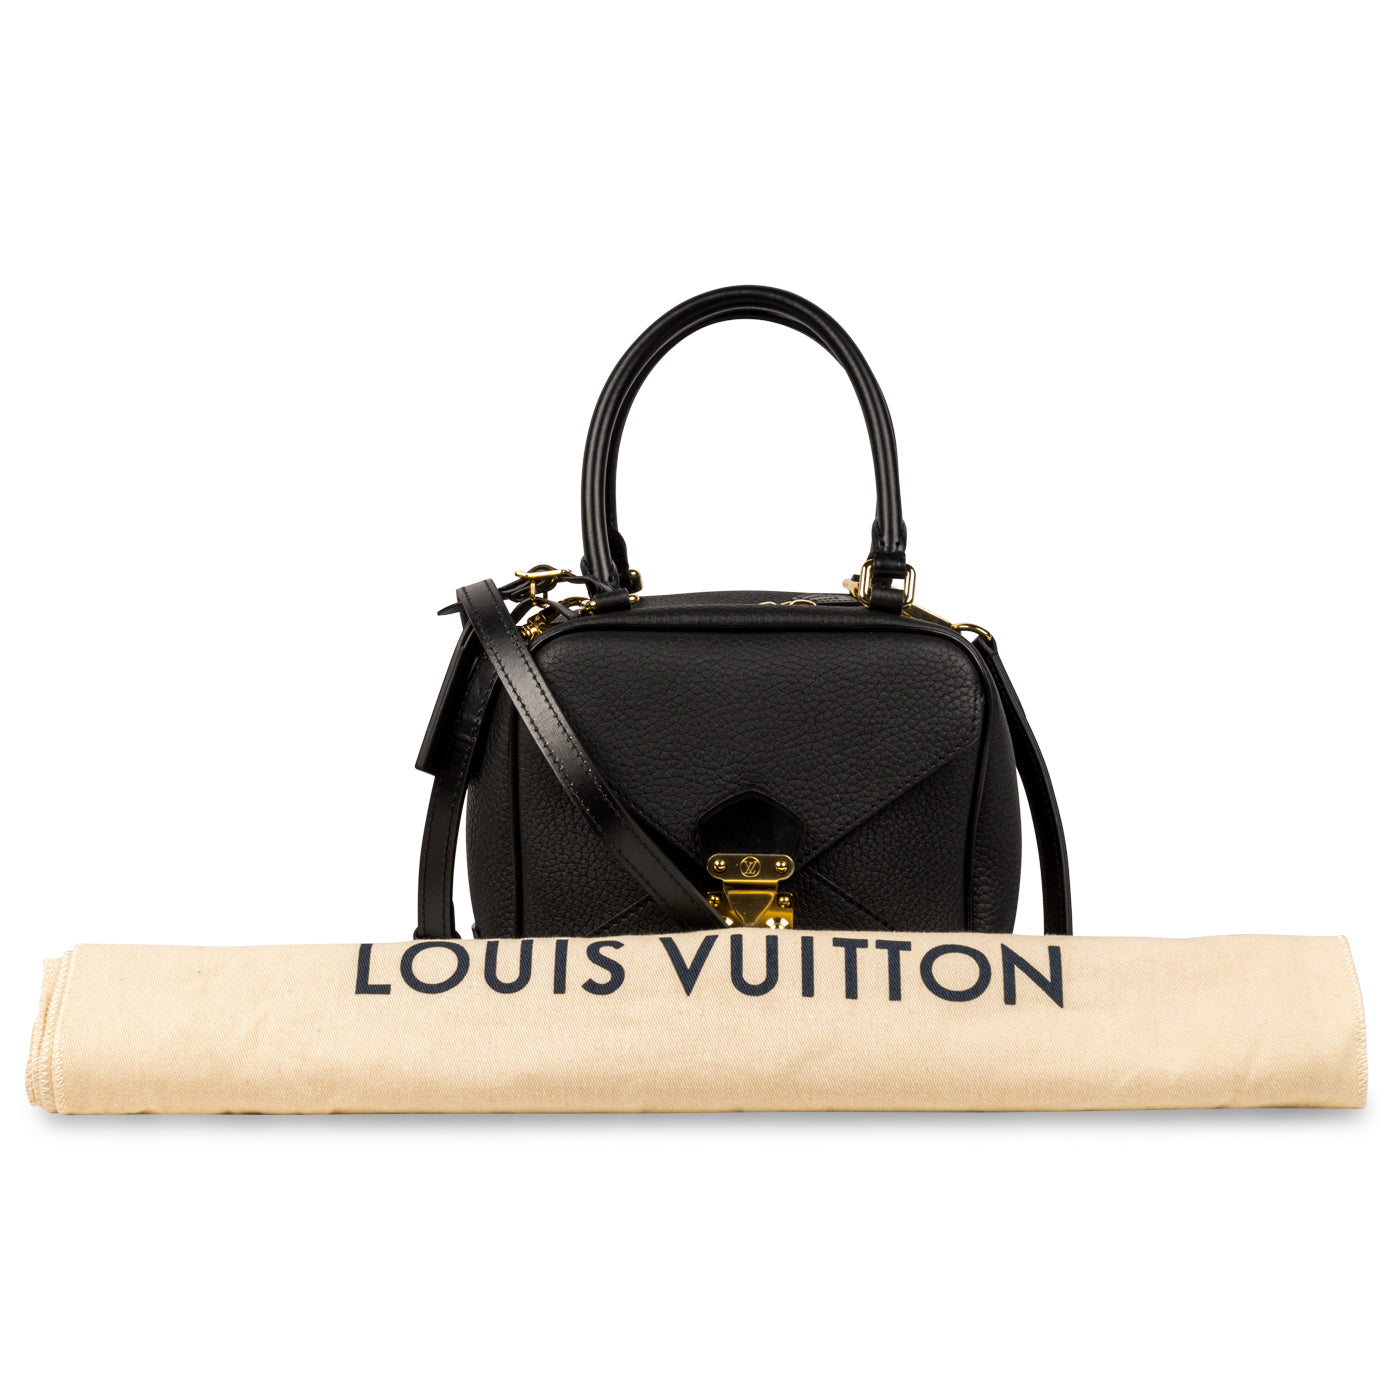 Louis Vuitton - Neo Square Bag - Pre-Loved